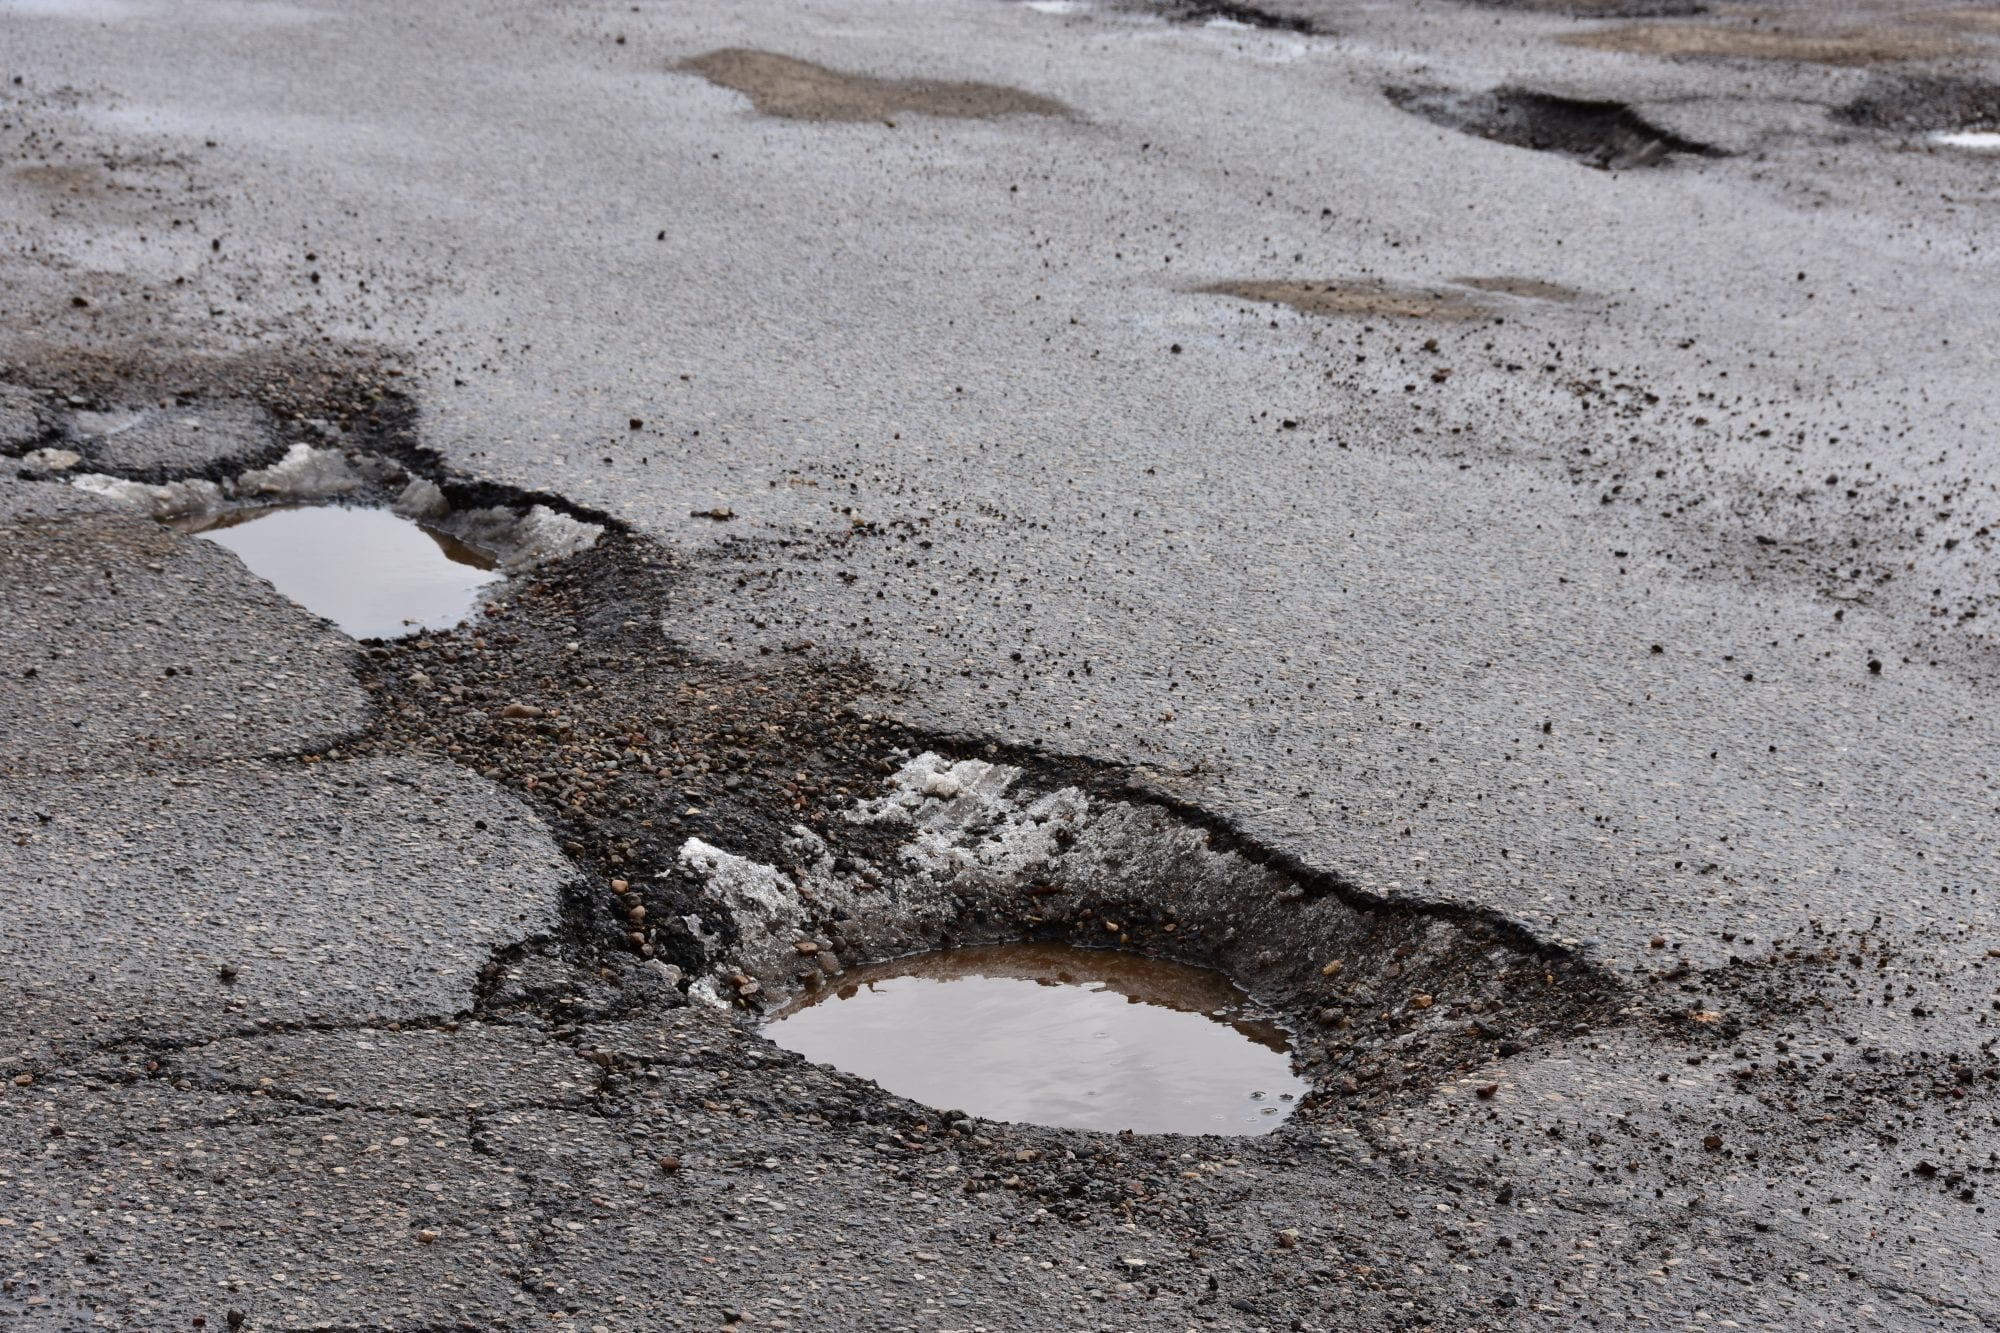 Picture of potholes in a road